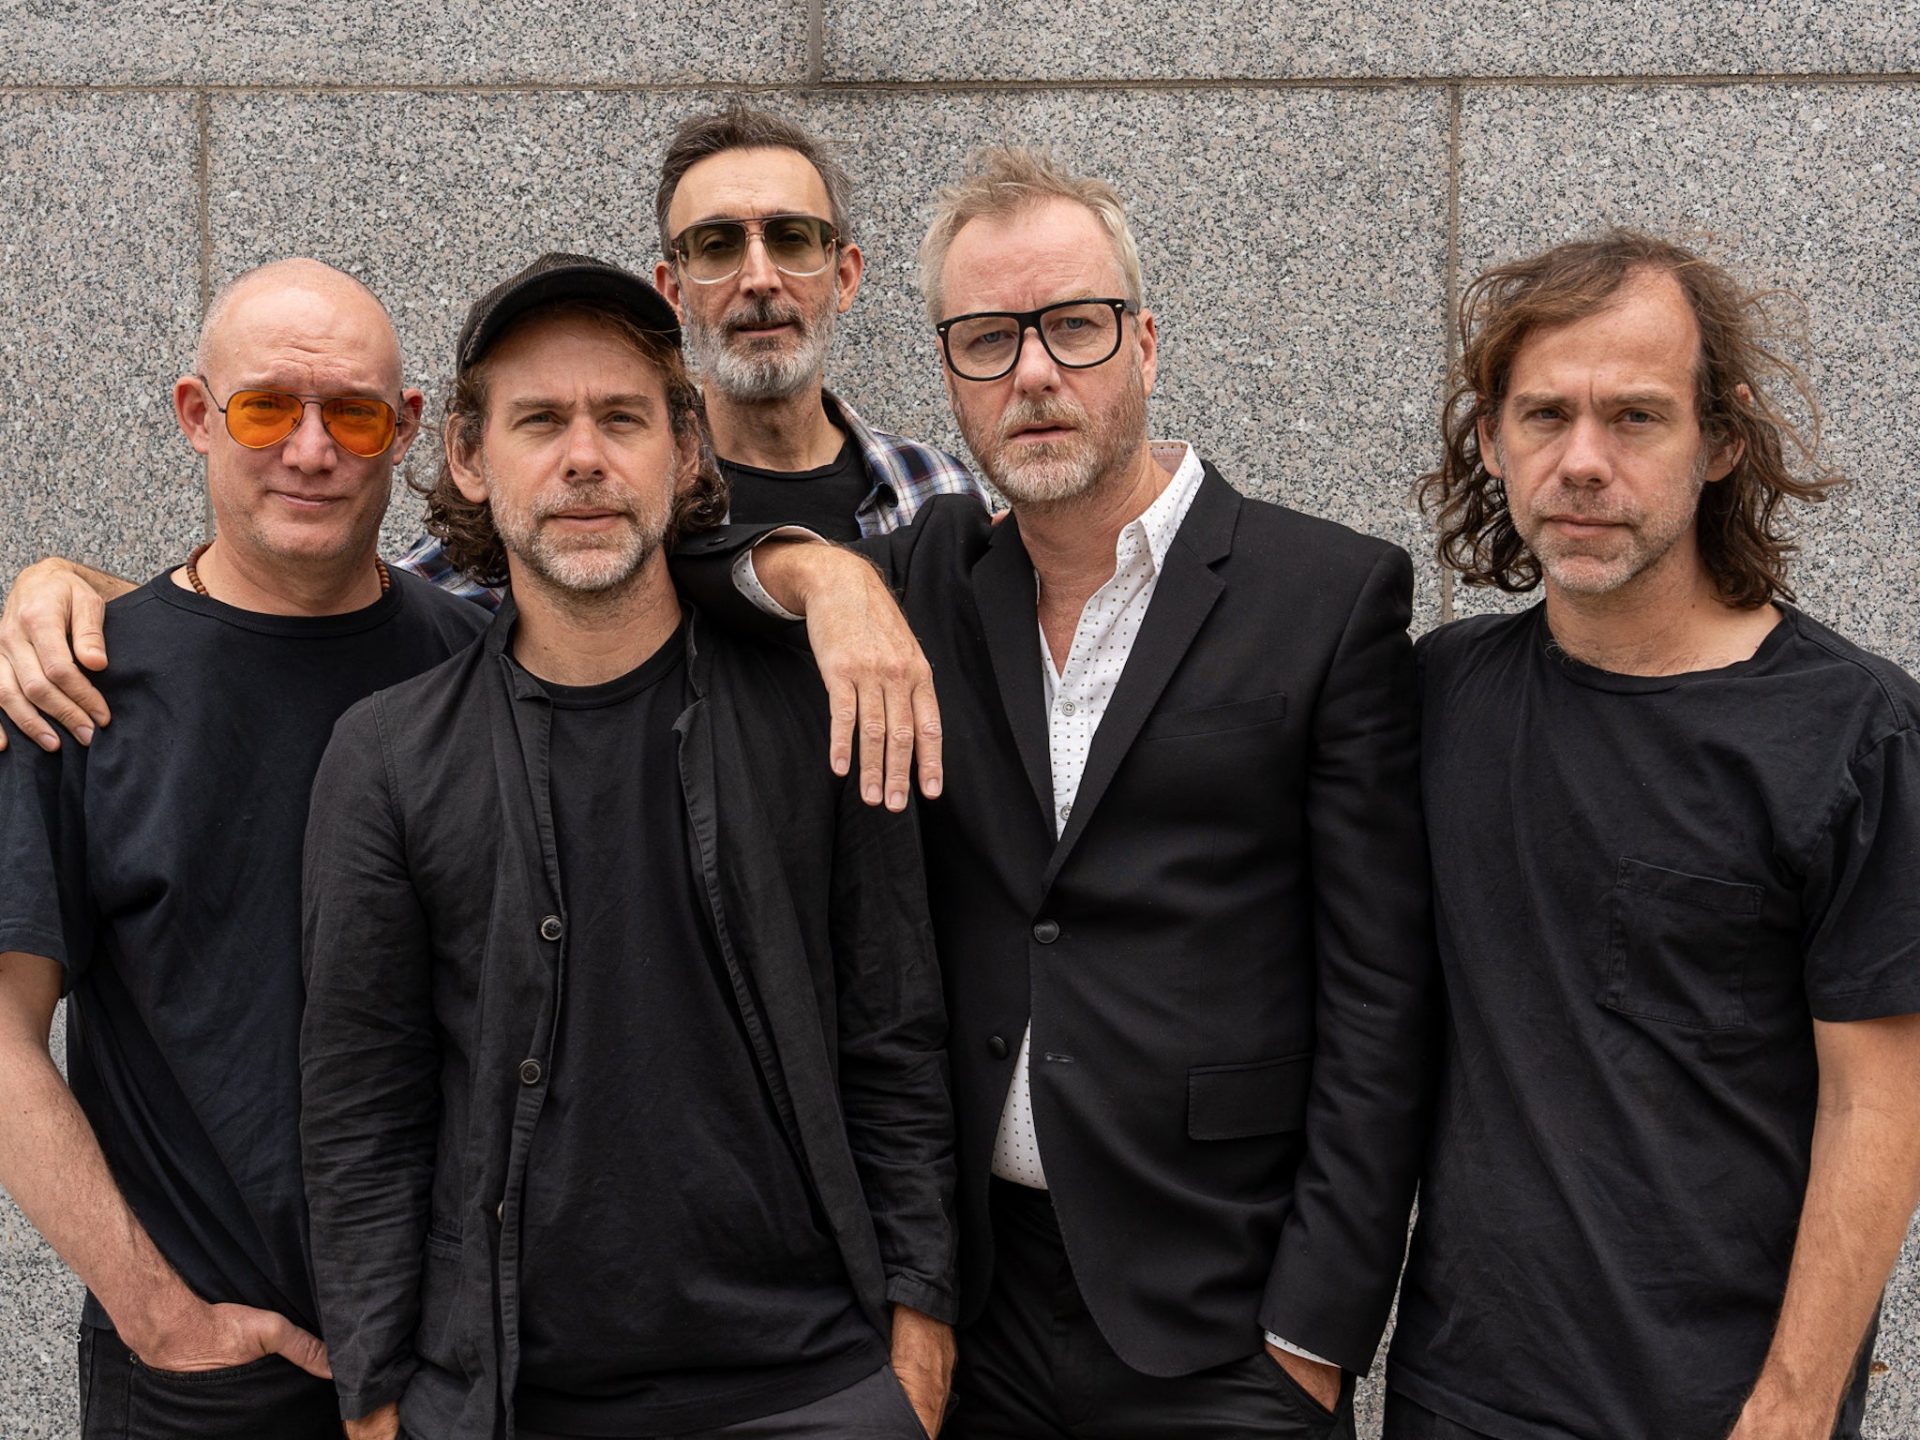 The National Tour